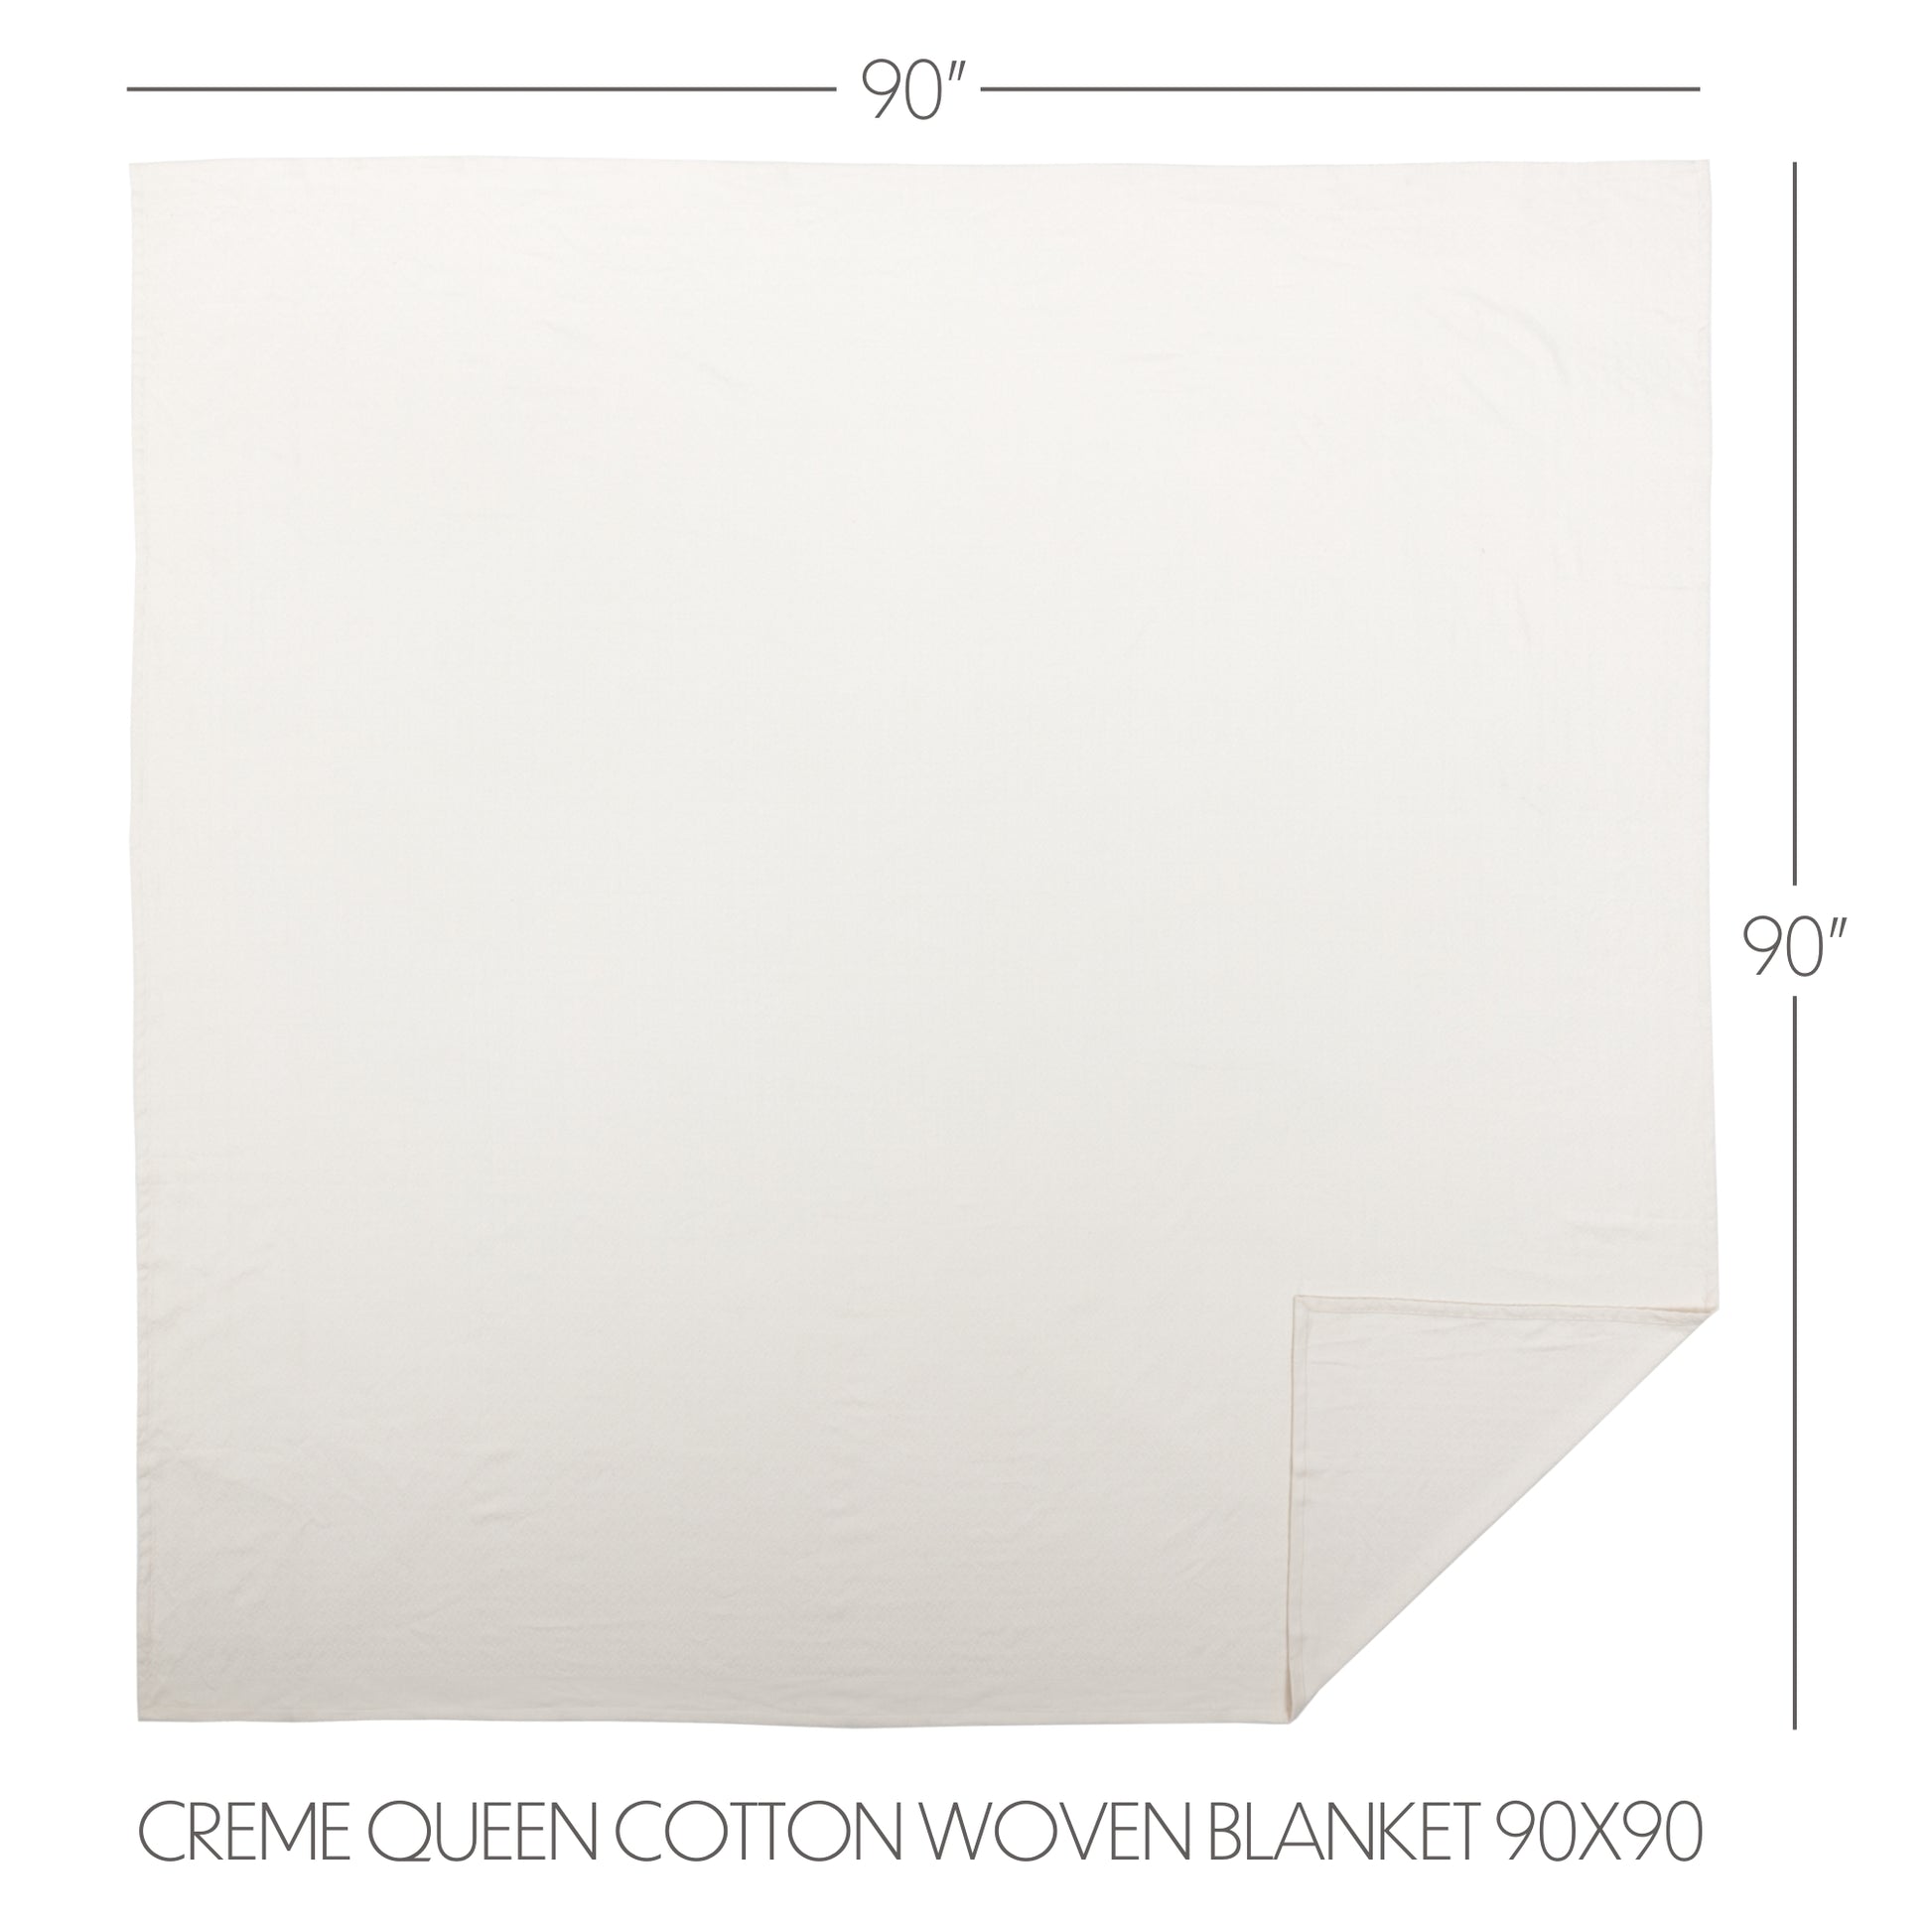 43064-Serenity-Creme-Queen-Cotton-Woven-Blanket-90x90-image-5